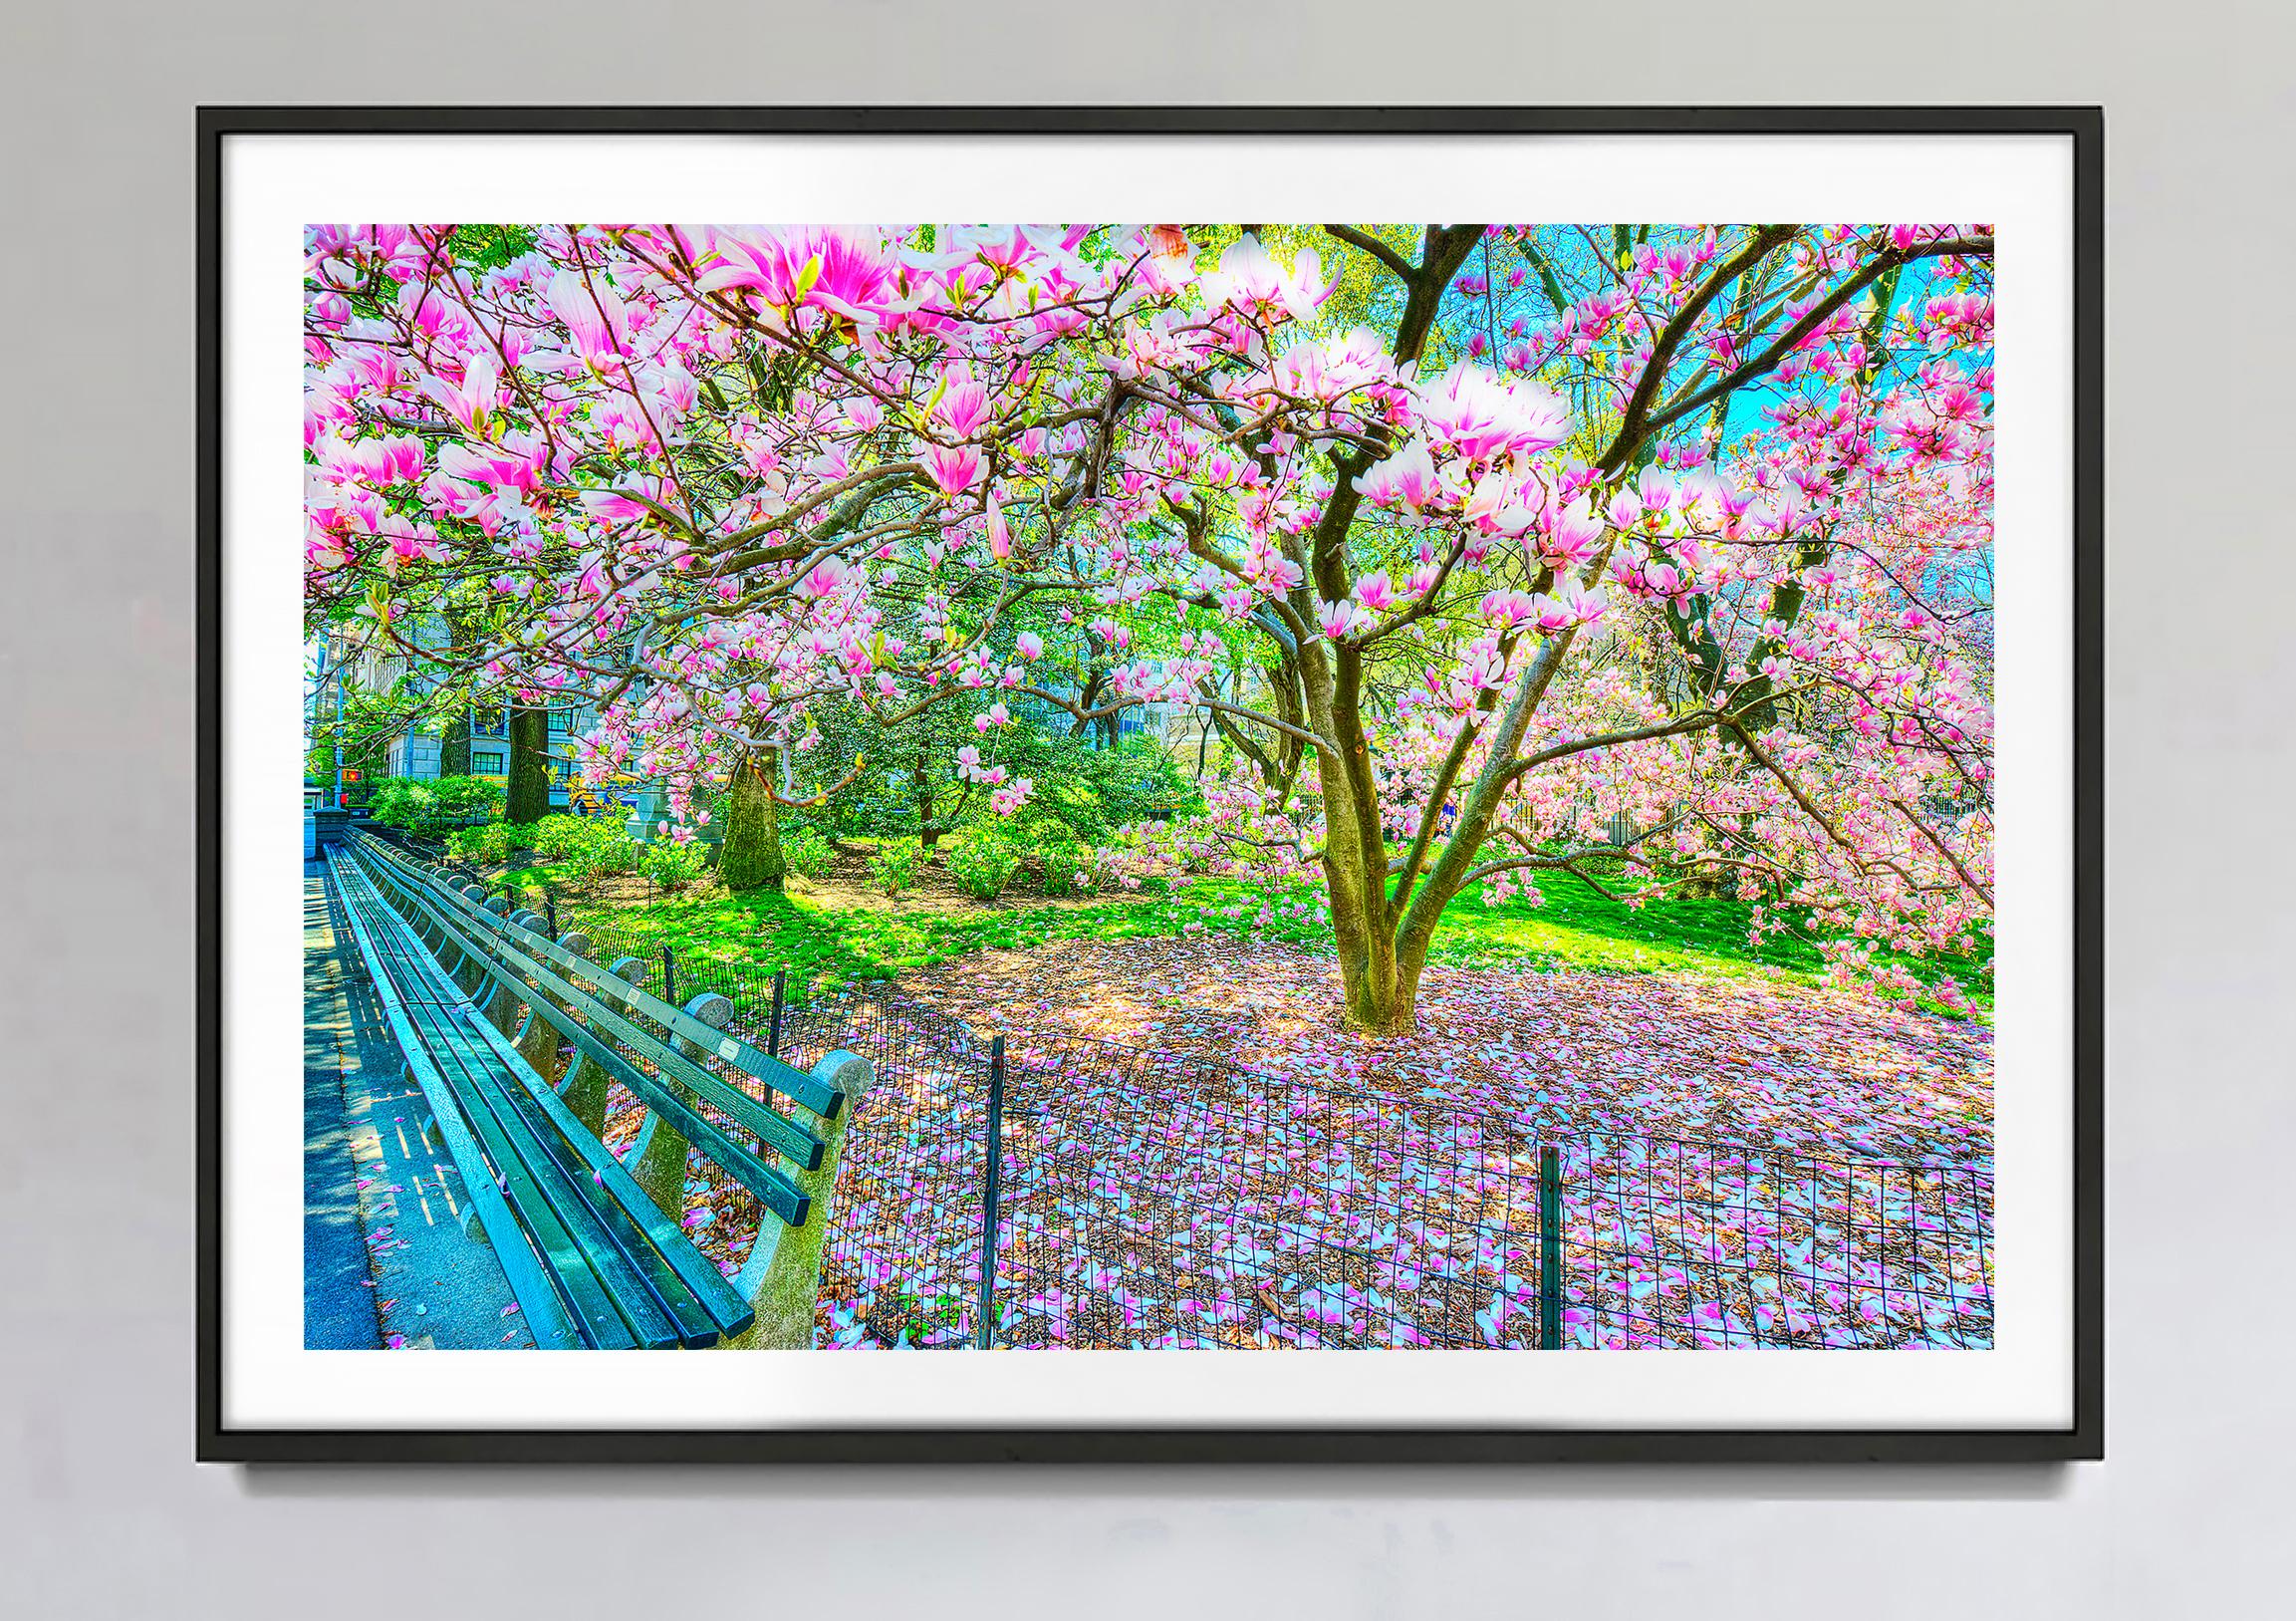 Blooming Magnolia Tree In Spring, Central Park  New York City in Pinks and Blues - Photograph by Mitchell Funk